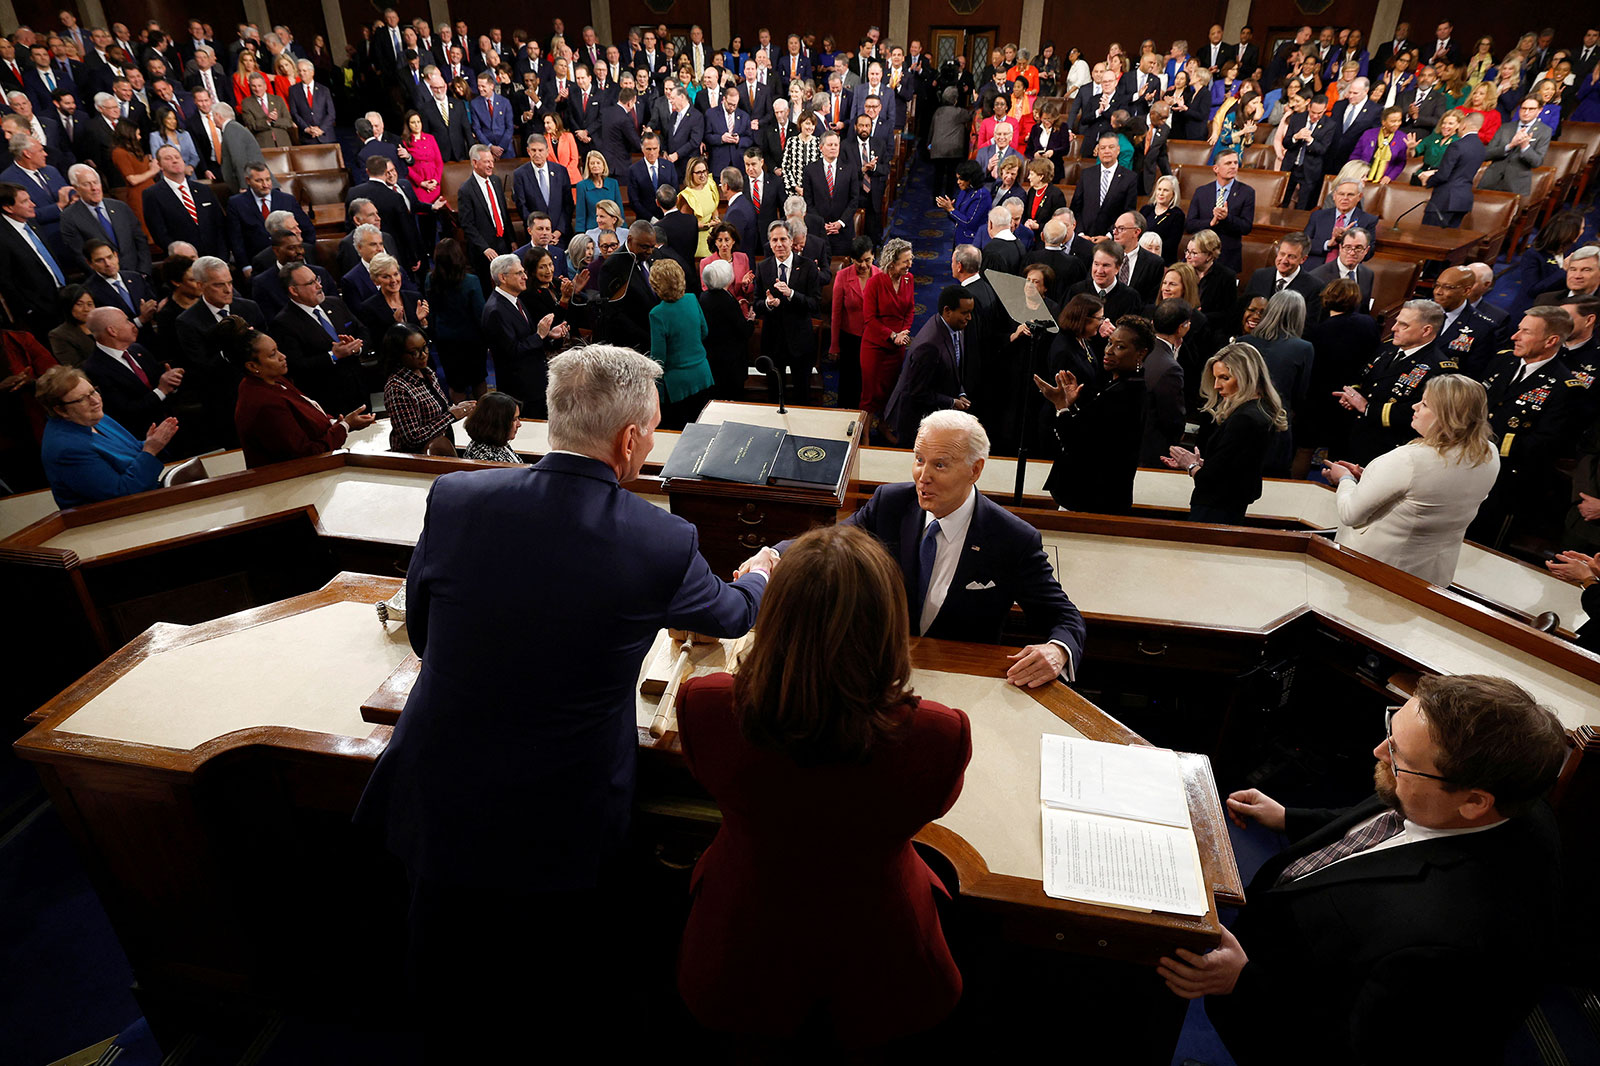 President Biden shakes hands with House Speaker Kevin McCarthy prior to his address on Tuesday.